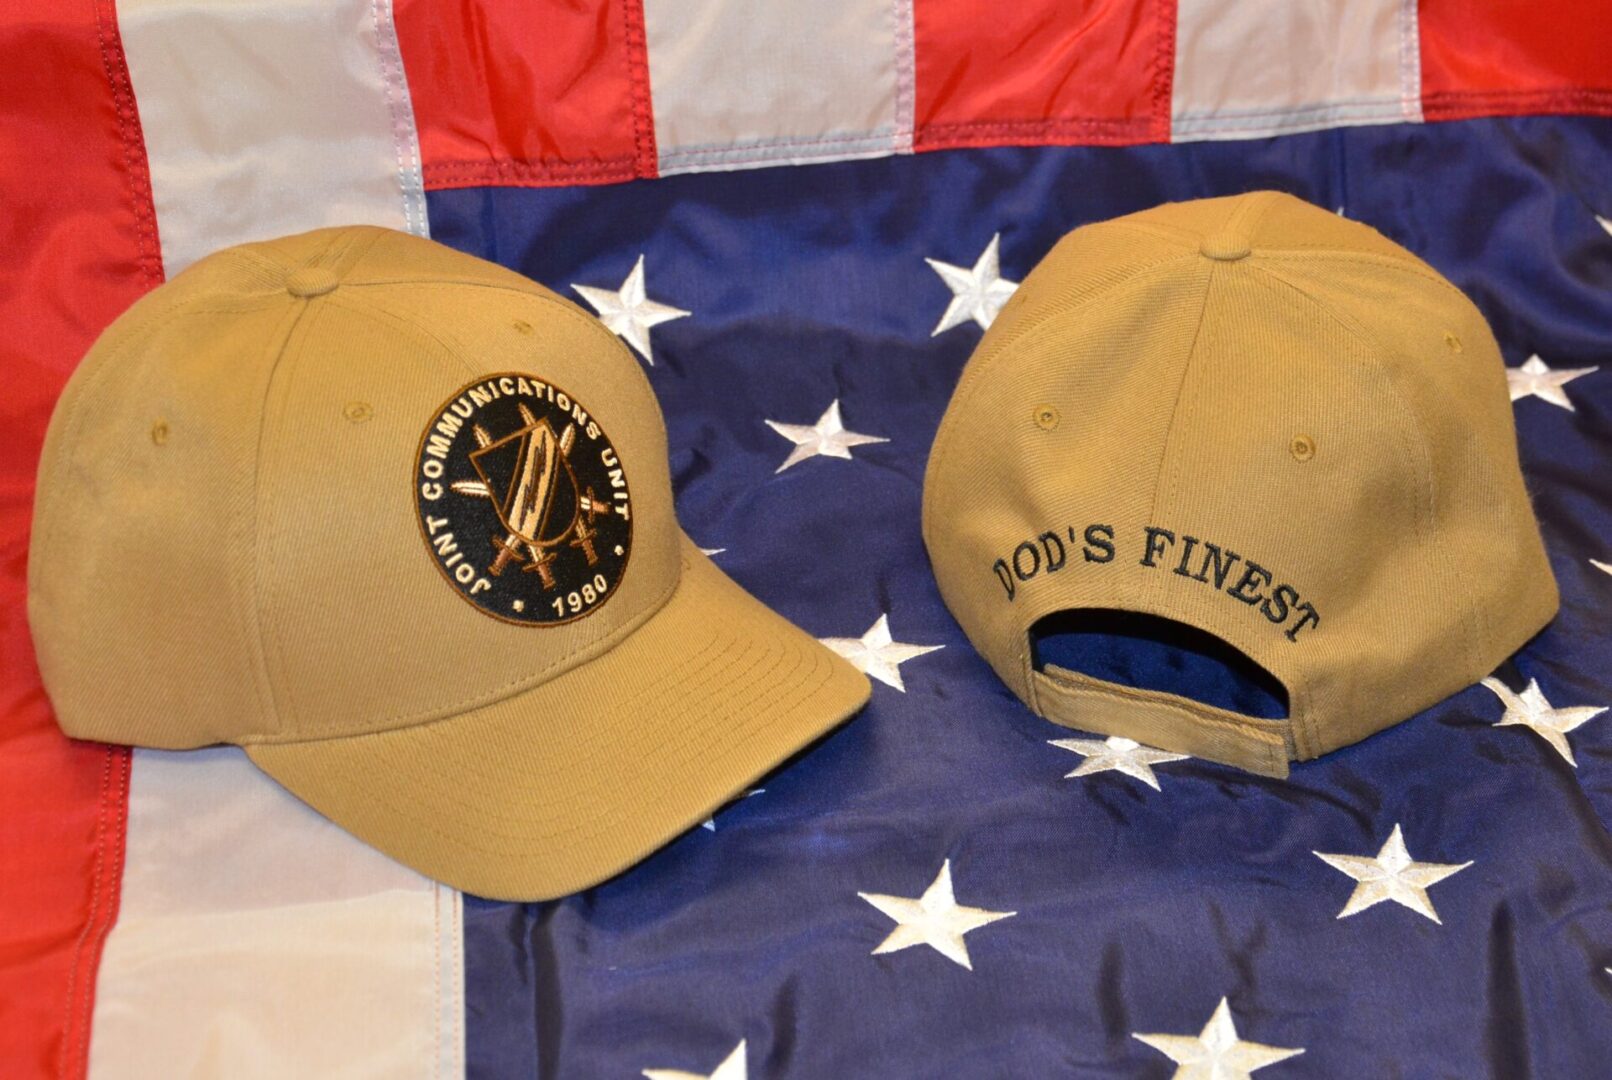 Two brown caps kept on the American cap